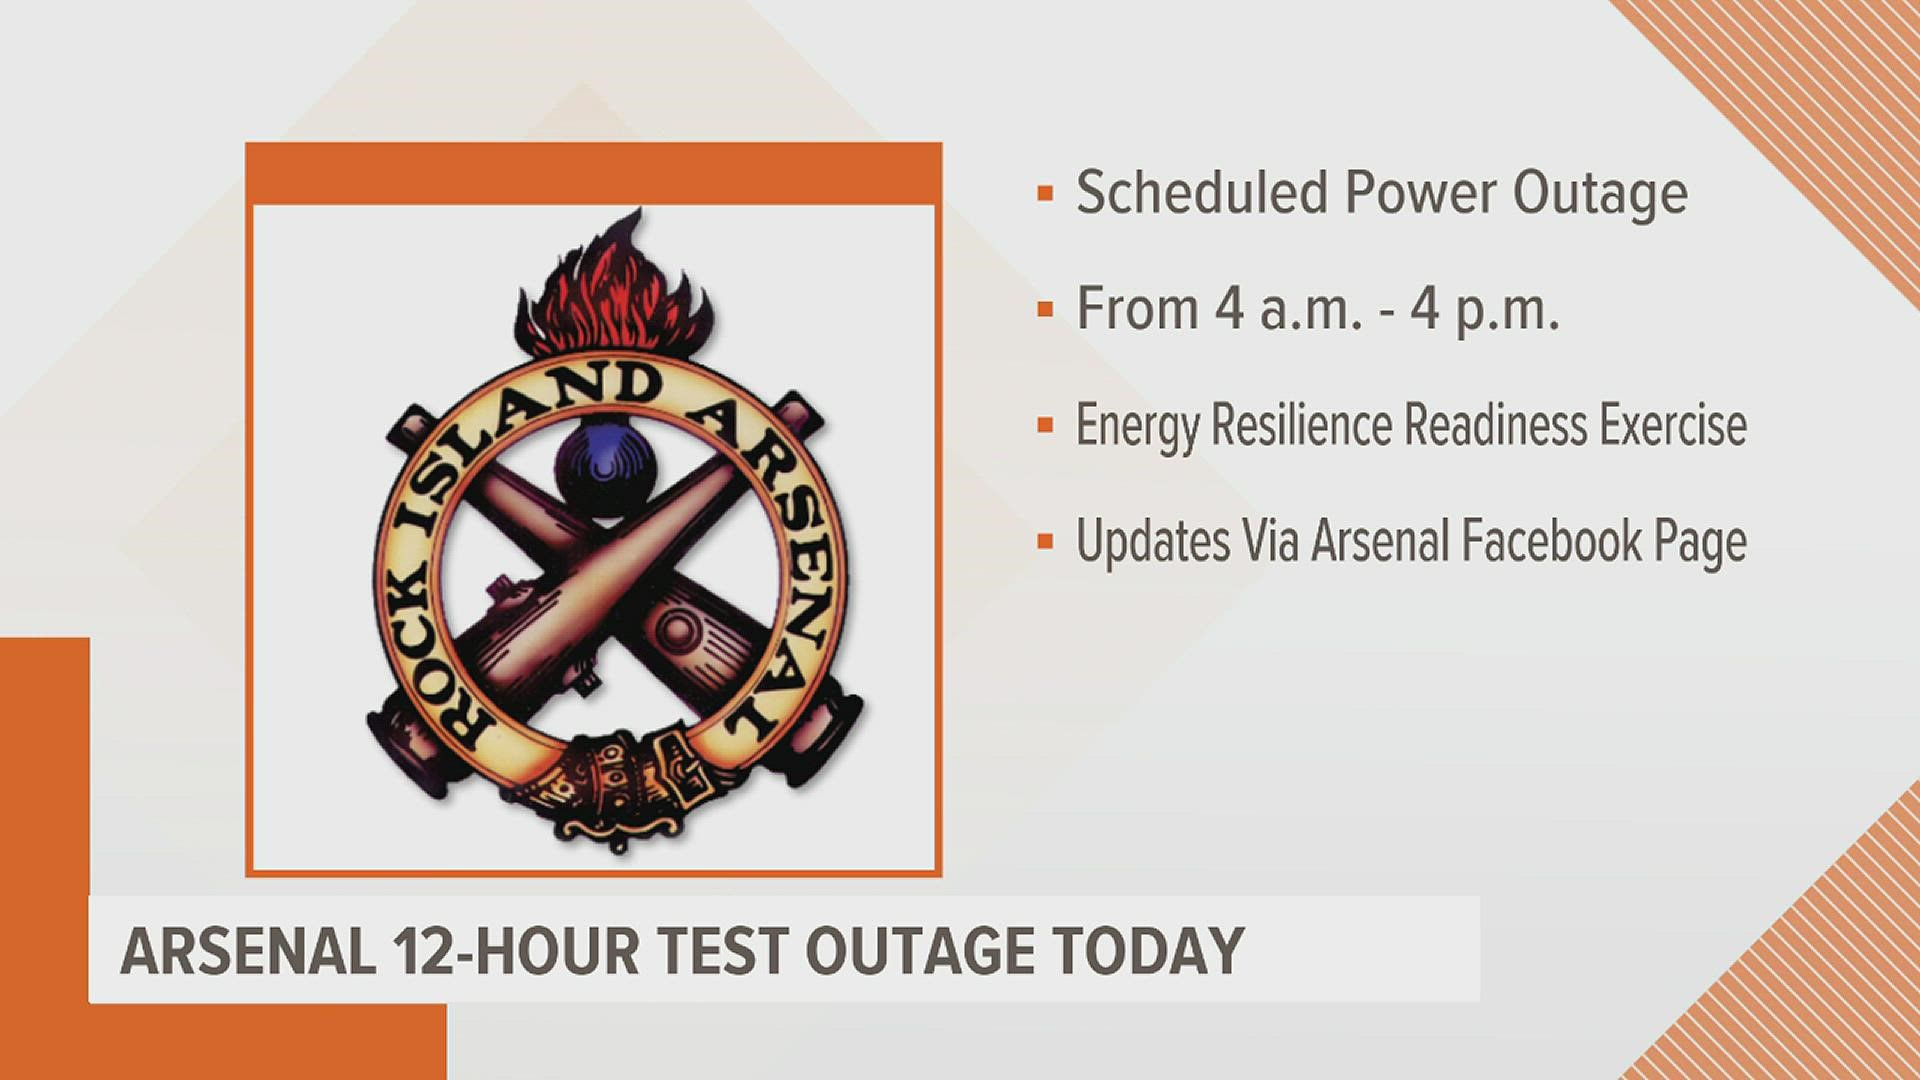 The Rock Island Arsenal will undergo a scheduled power outage Monday to test its energy systems, critical infrastructure and equipment.